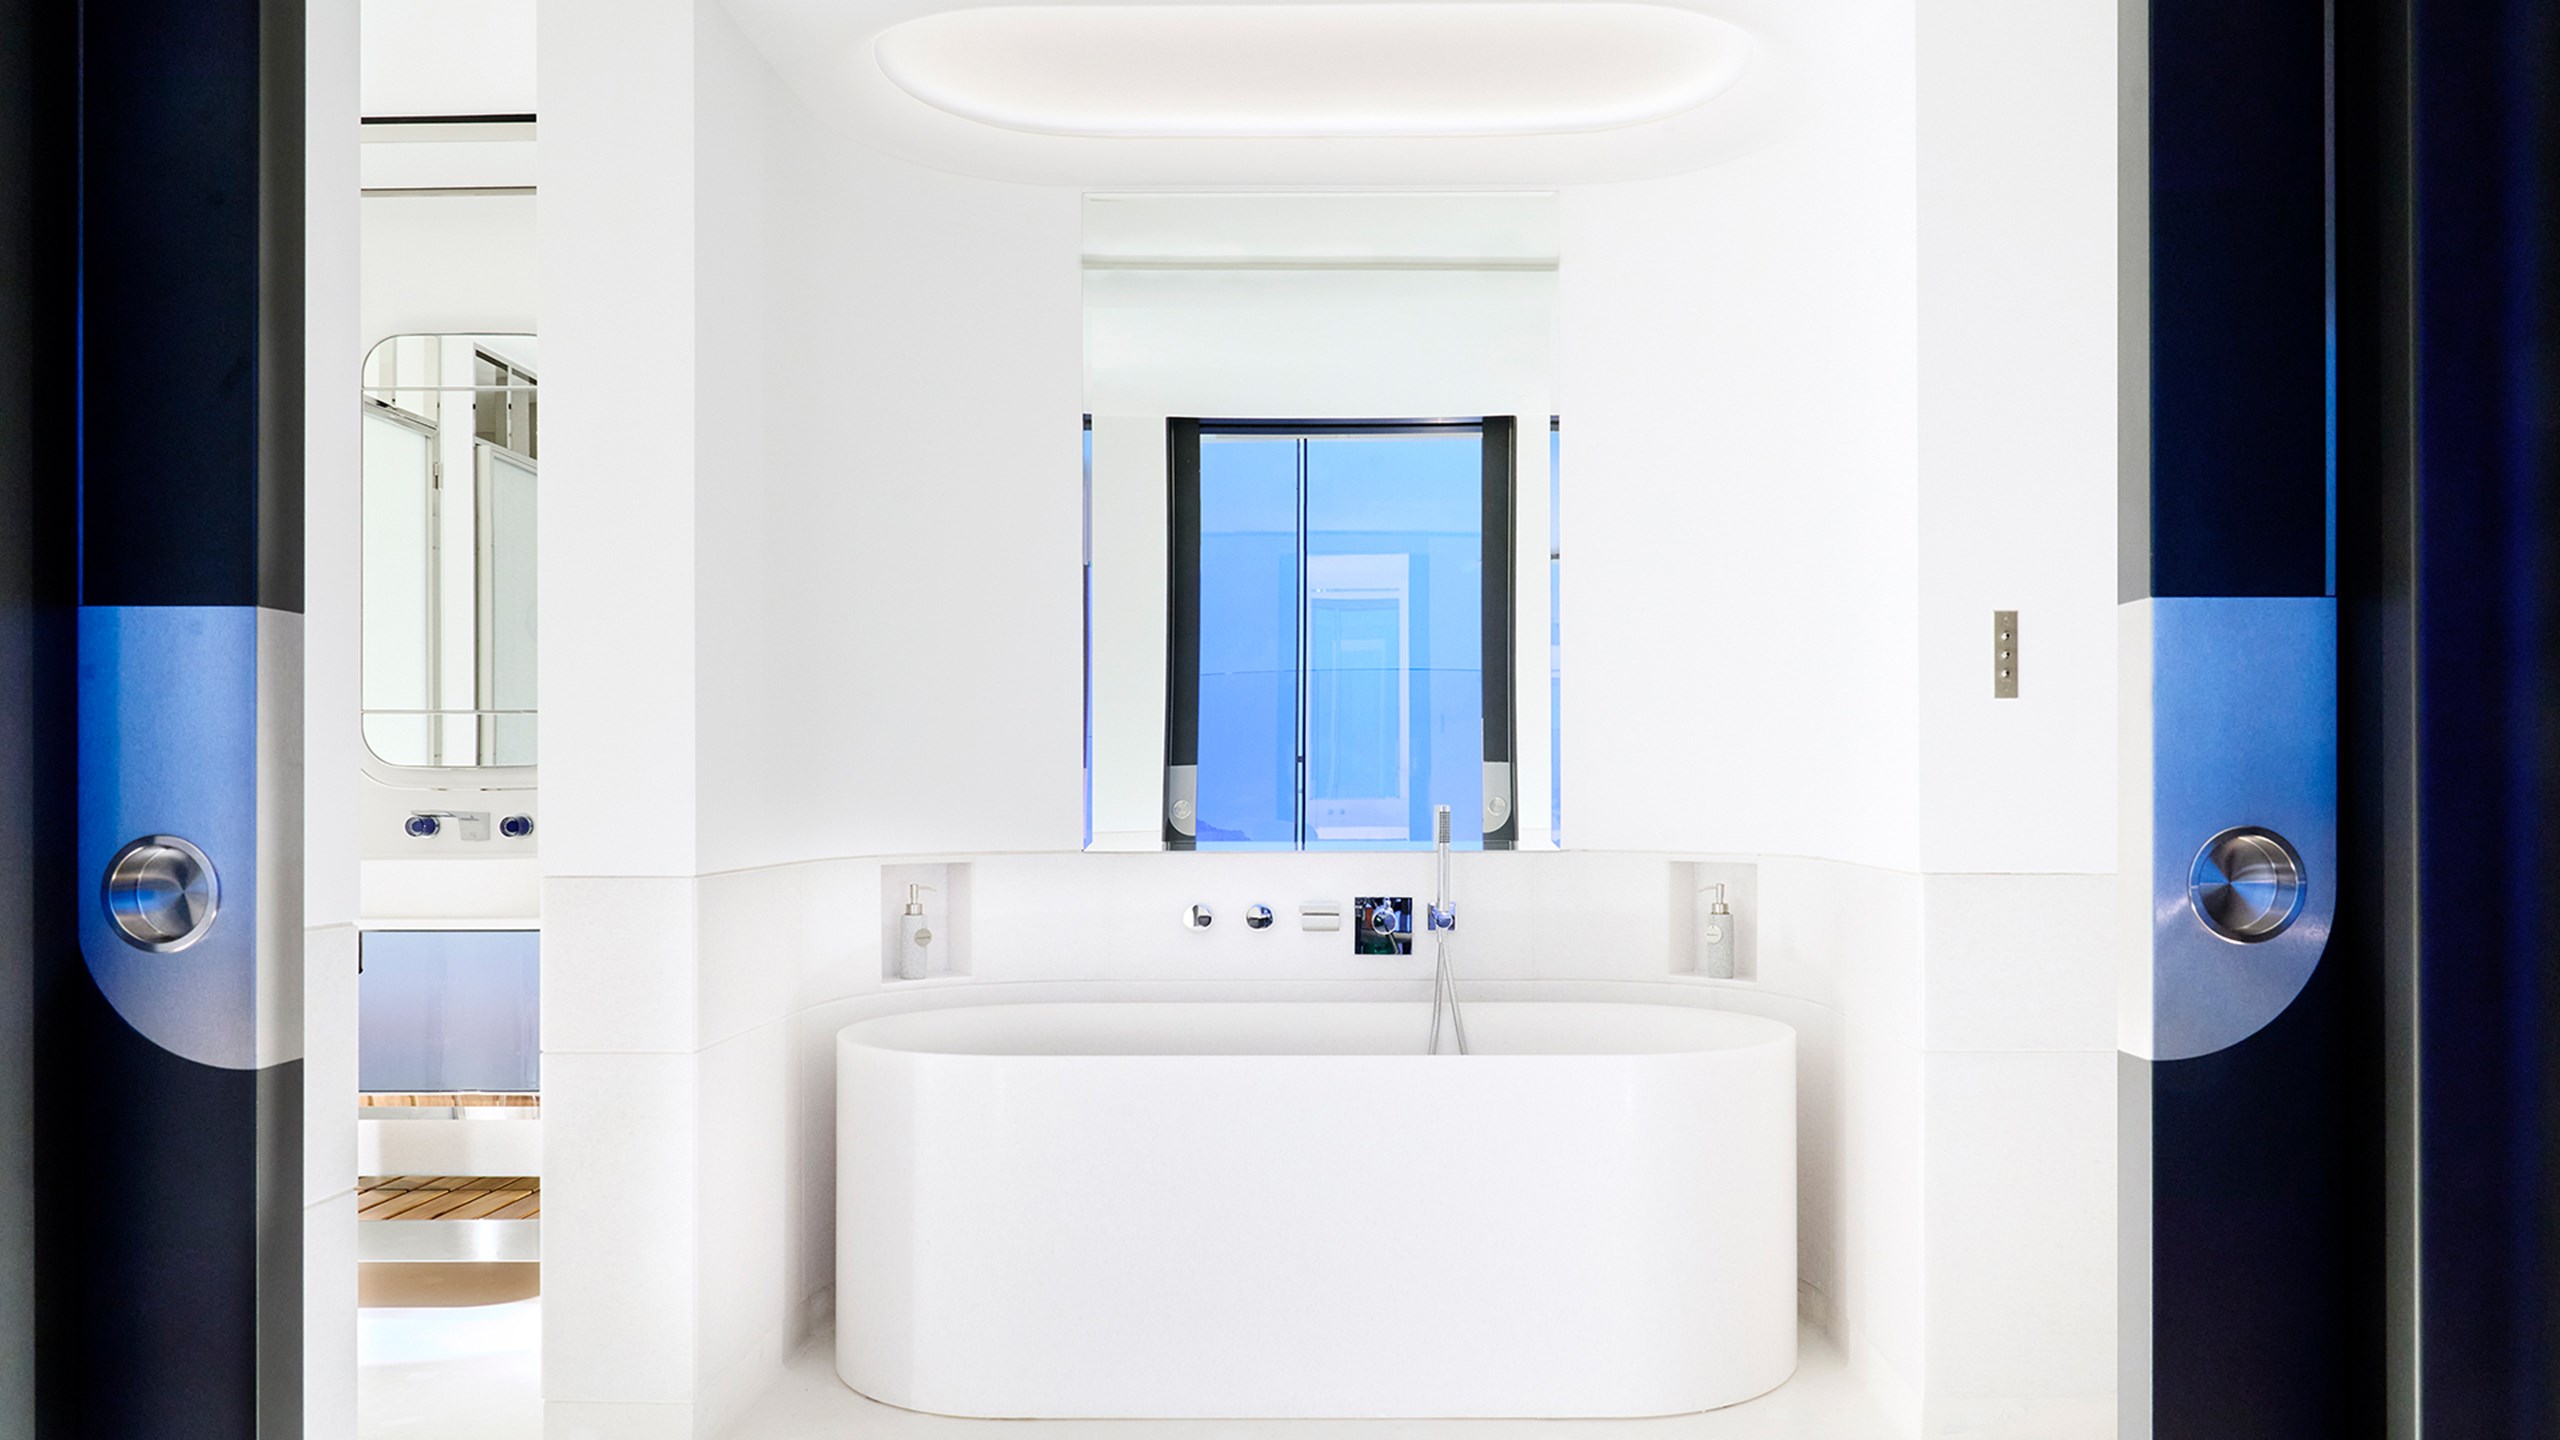 Panoramic Suite - bathroom with bathtub and mirror above it.